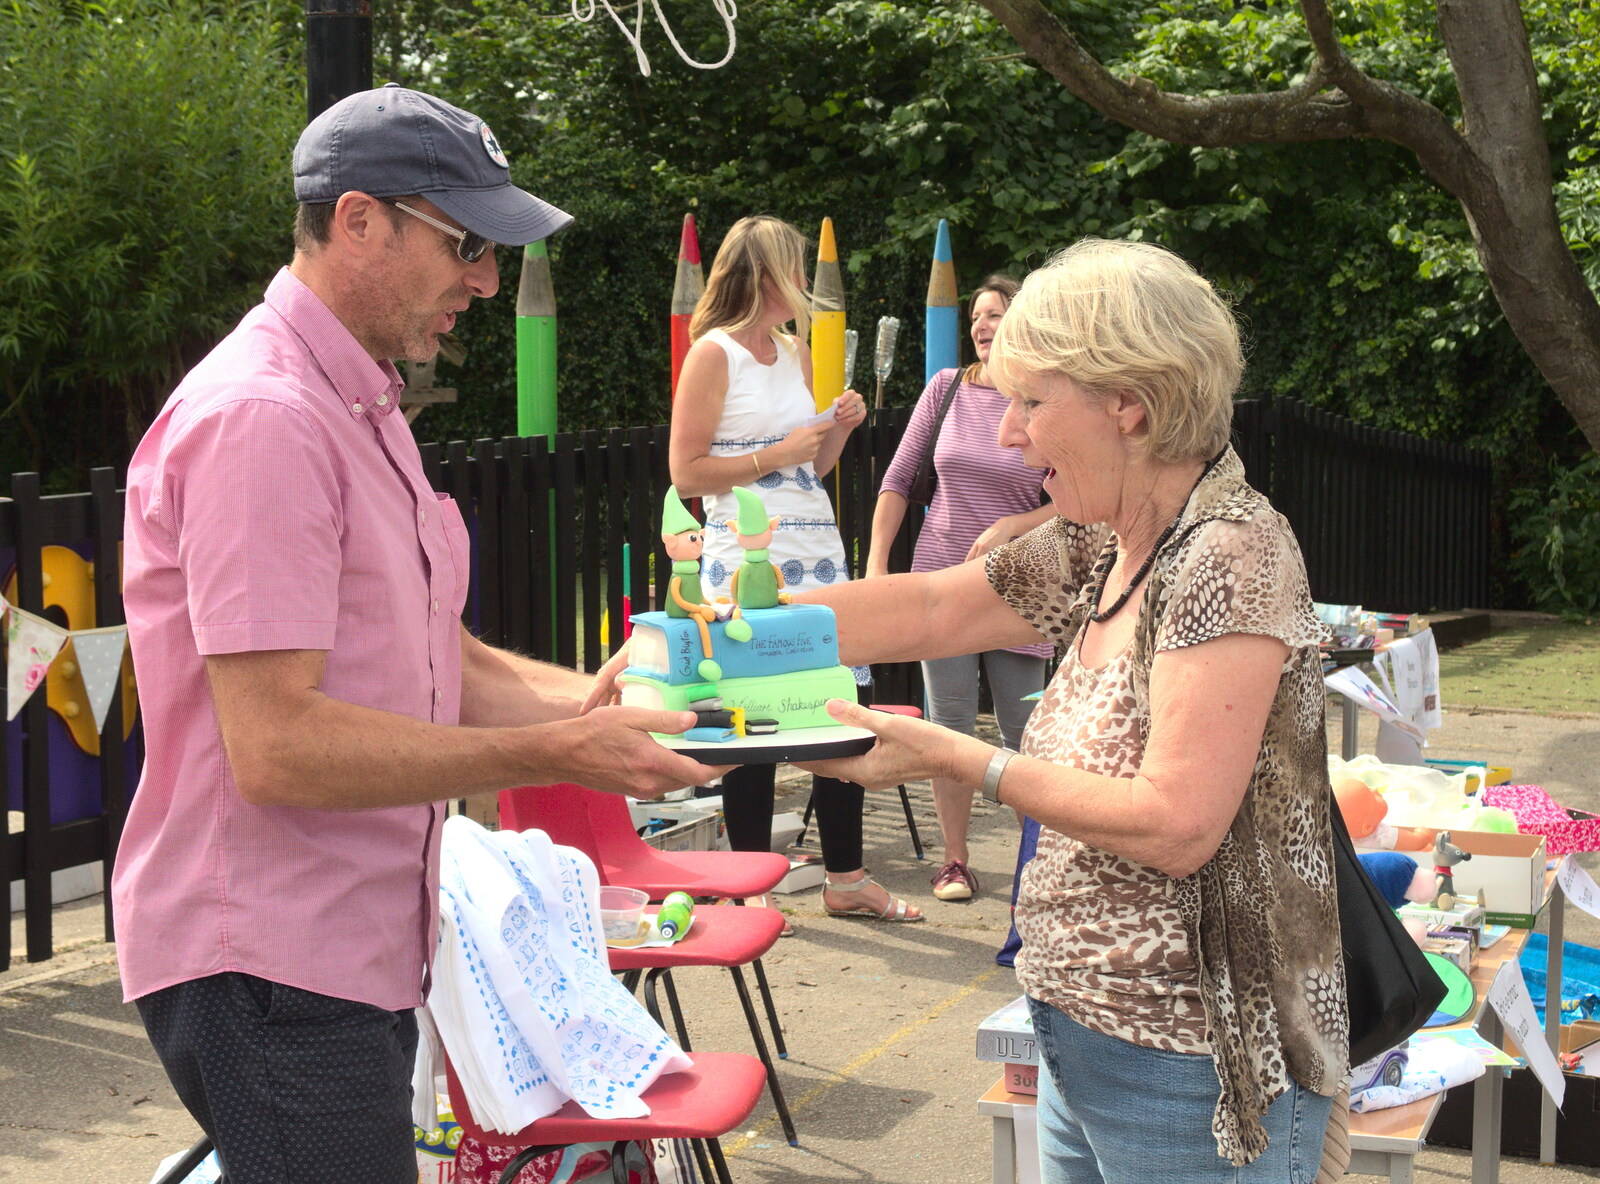 The cake prize is handed over from Eye Primary Summer Fayre, Eye, Suffolk - 9th July 2016